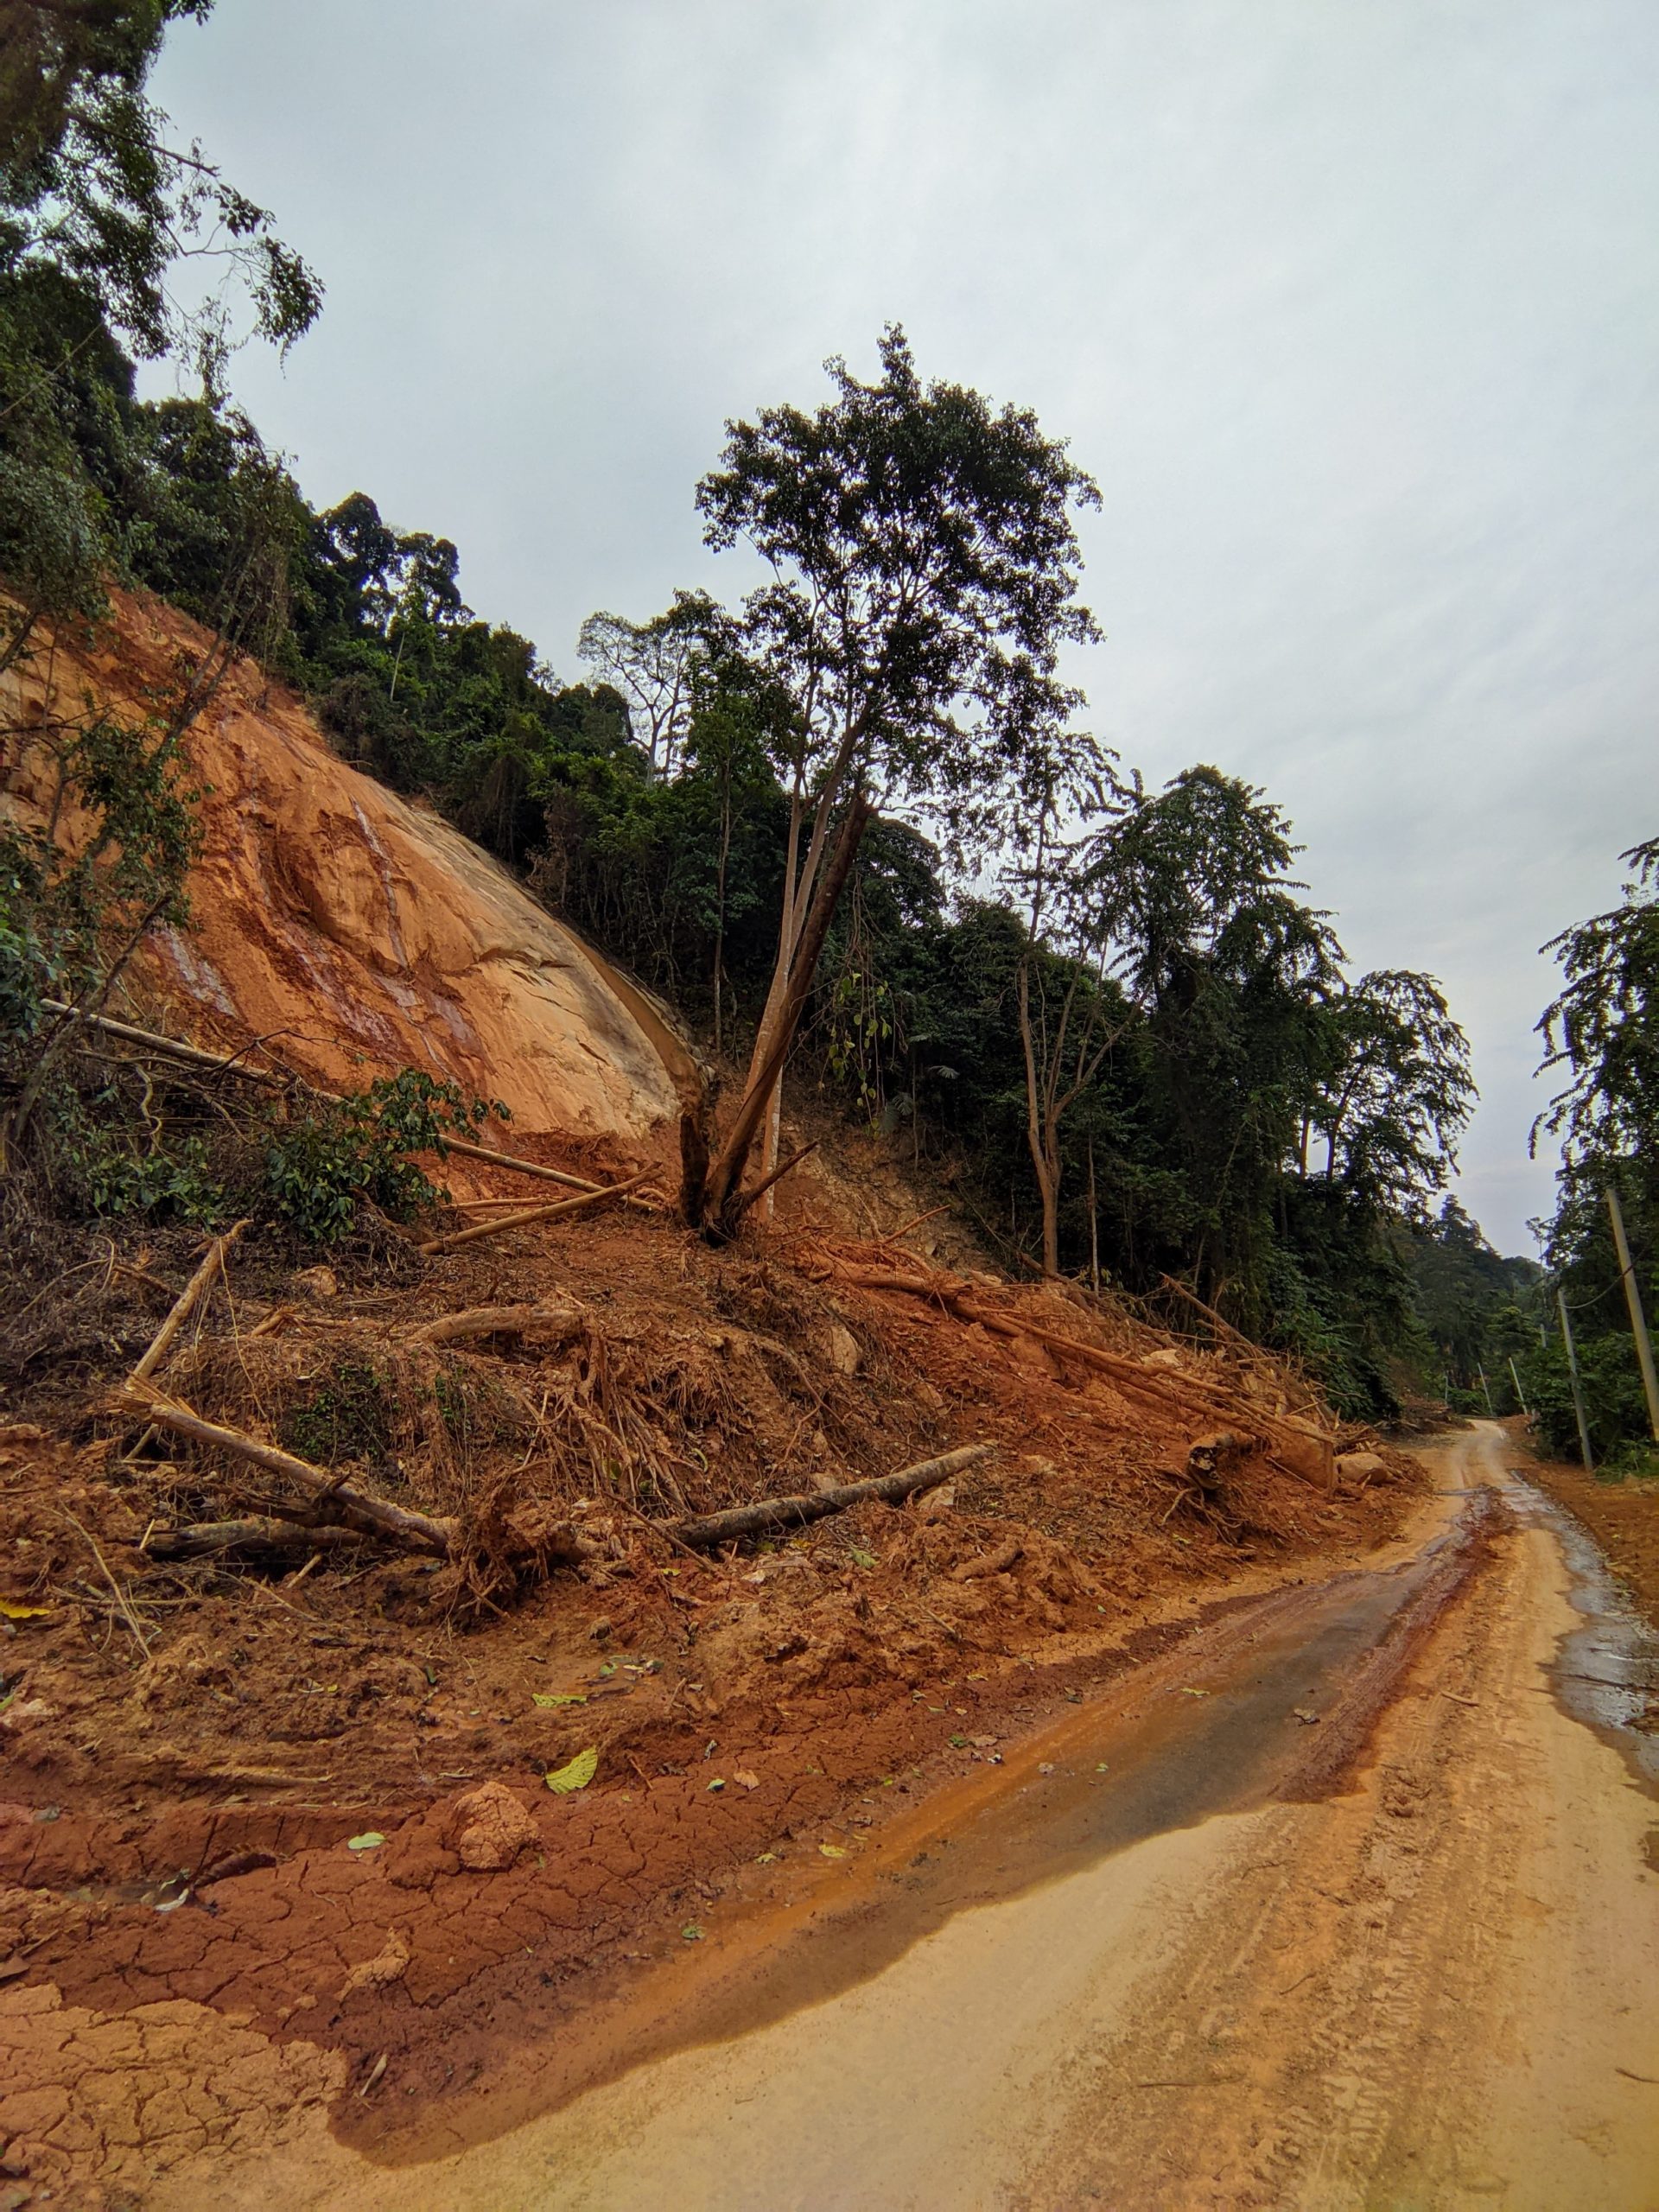 A landslide from the rains in December 2021 on Route N32 in Malaysia.